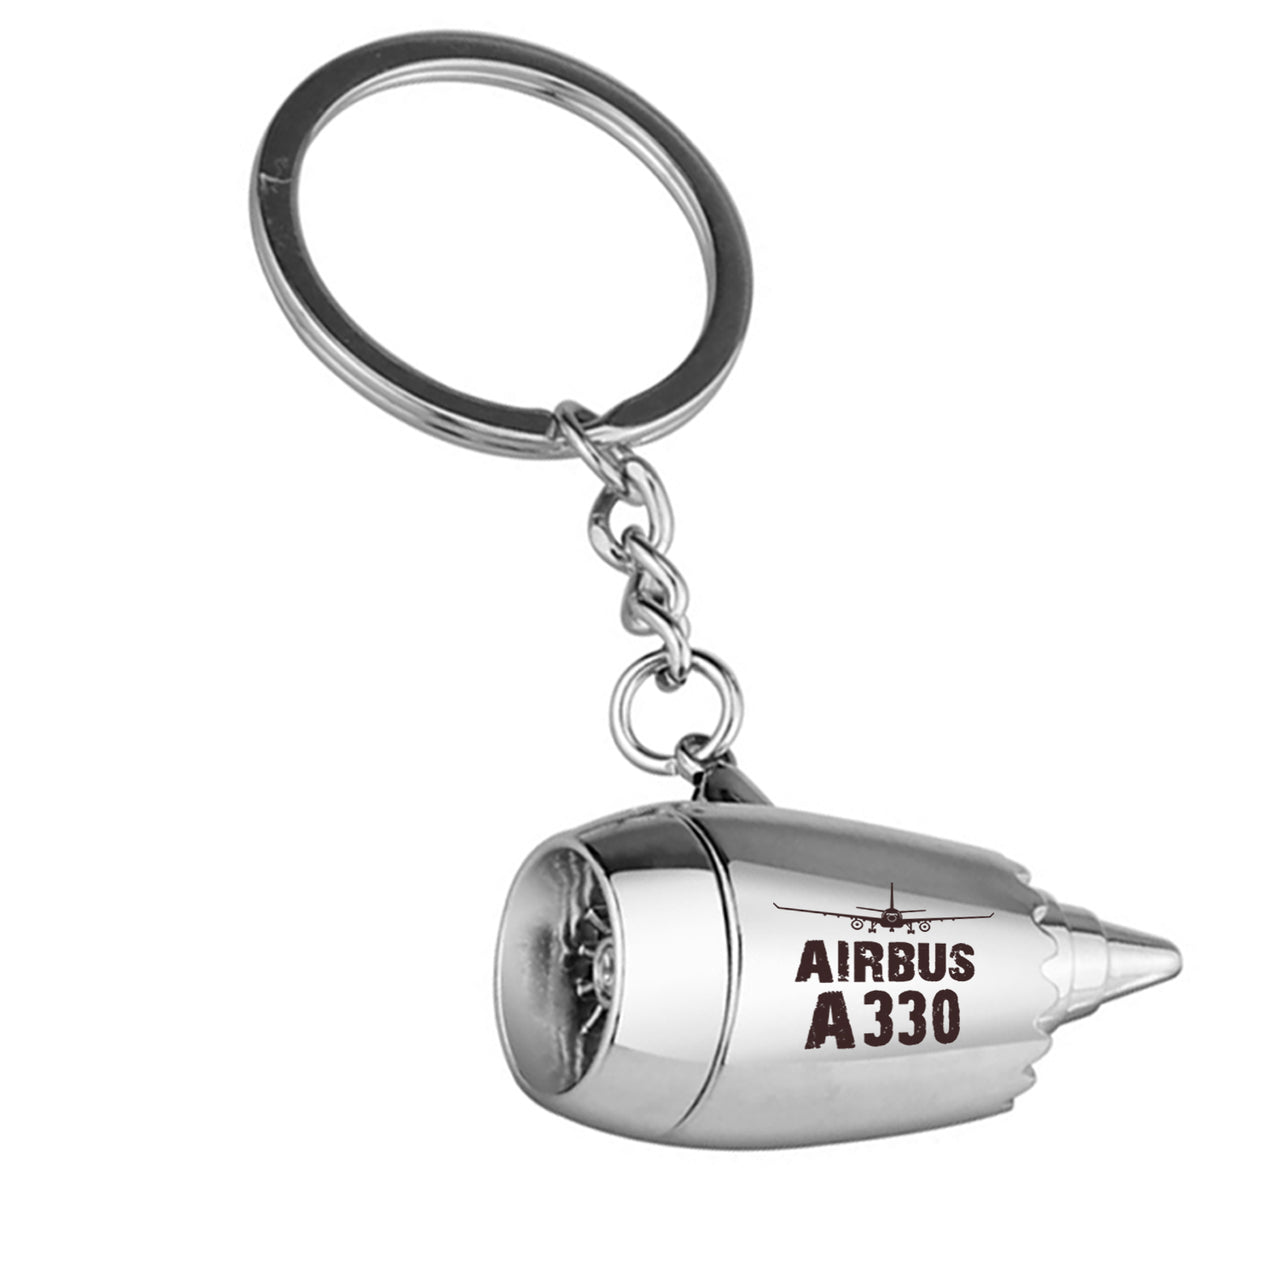 Airbus A330 & Plane Designed Airplane Jet Engine Shaped Key Chain